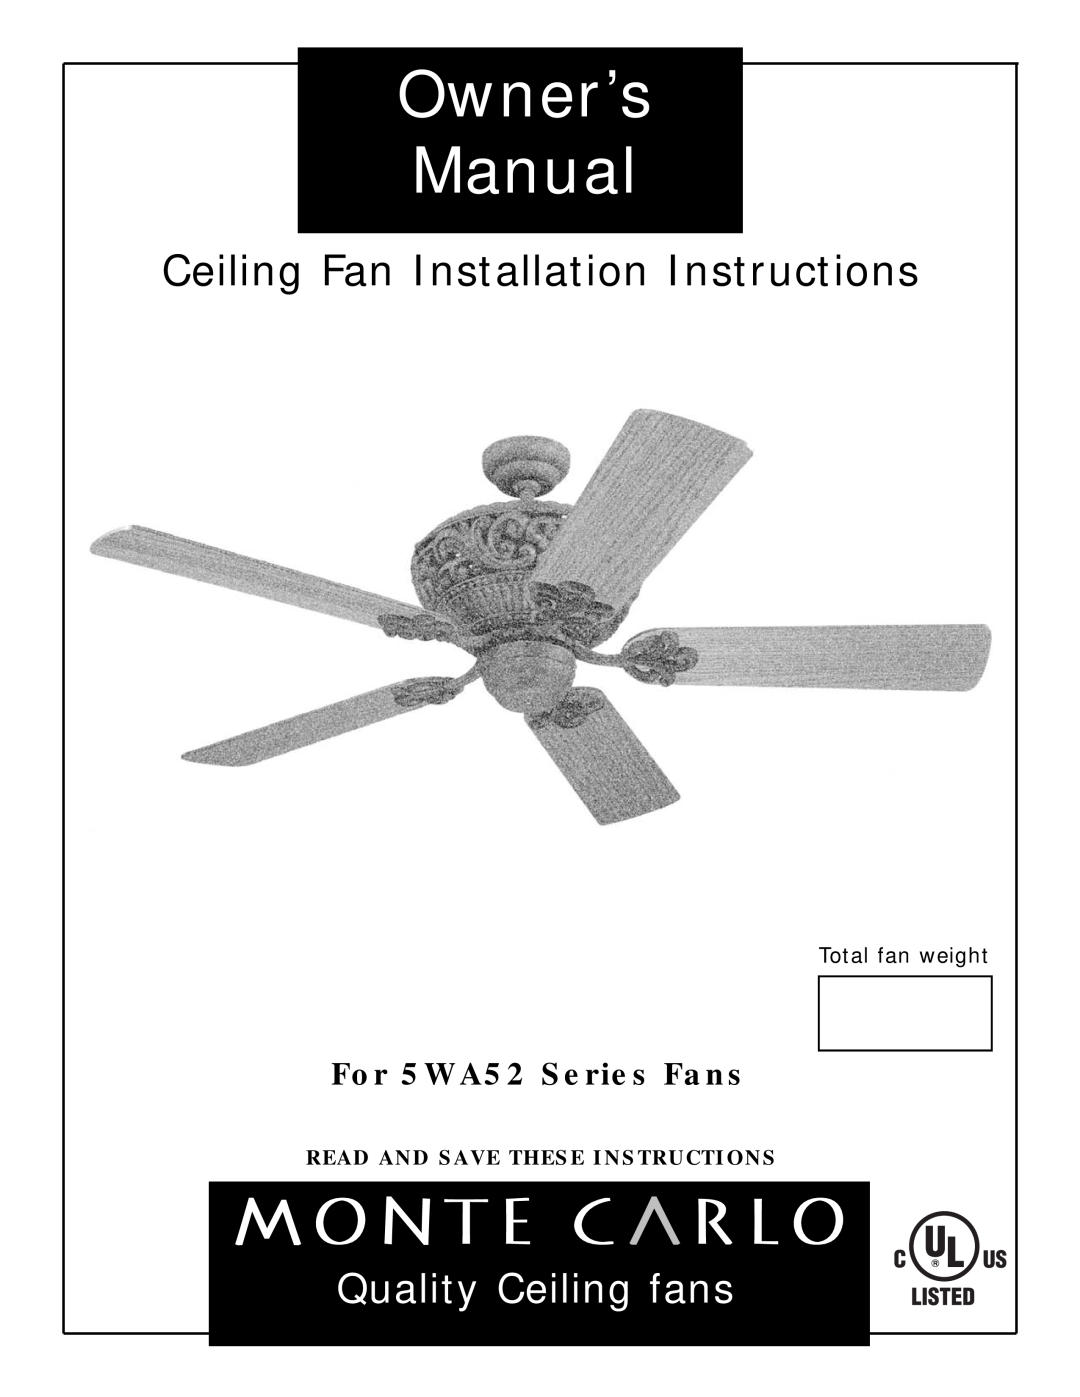 Monte Carlo Fan Company owner manual For 5WA52 Series Fans, Total fan weight, Read And Save These Instructions 